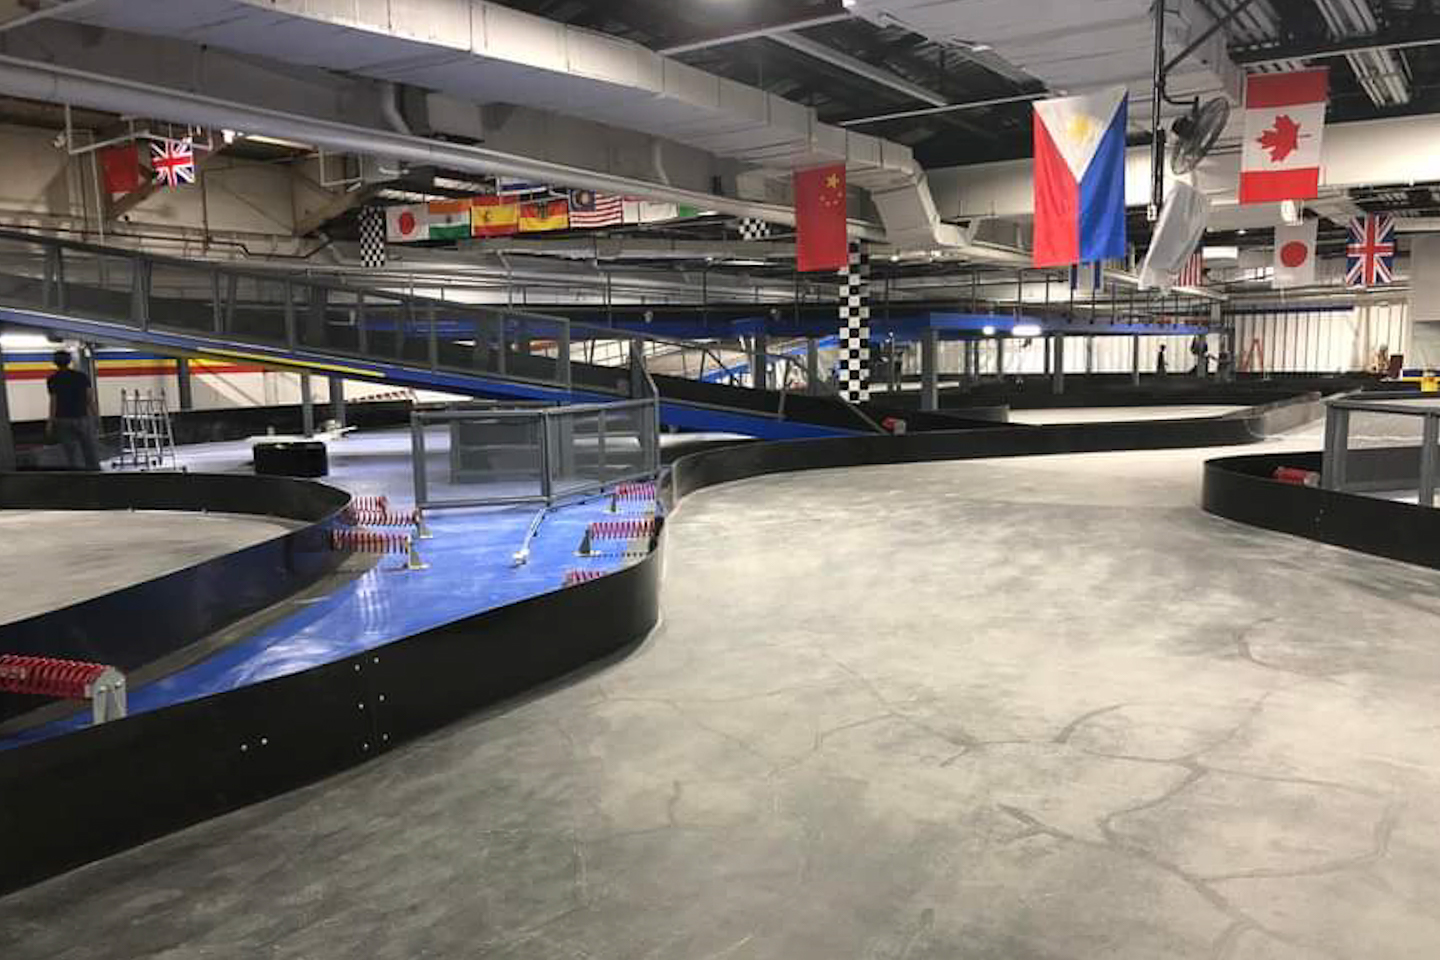 EKartRaceway, PH’s first indoor karting track to open on May 1, 2022